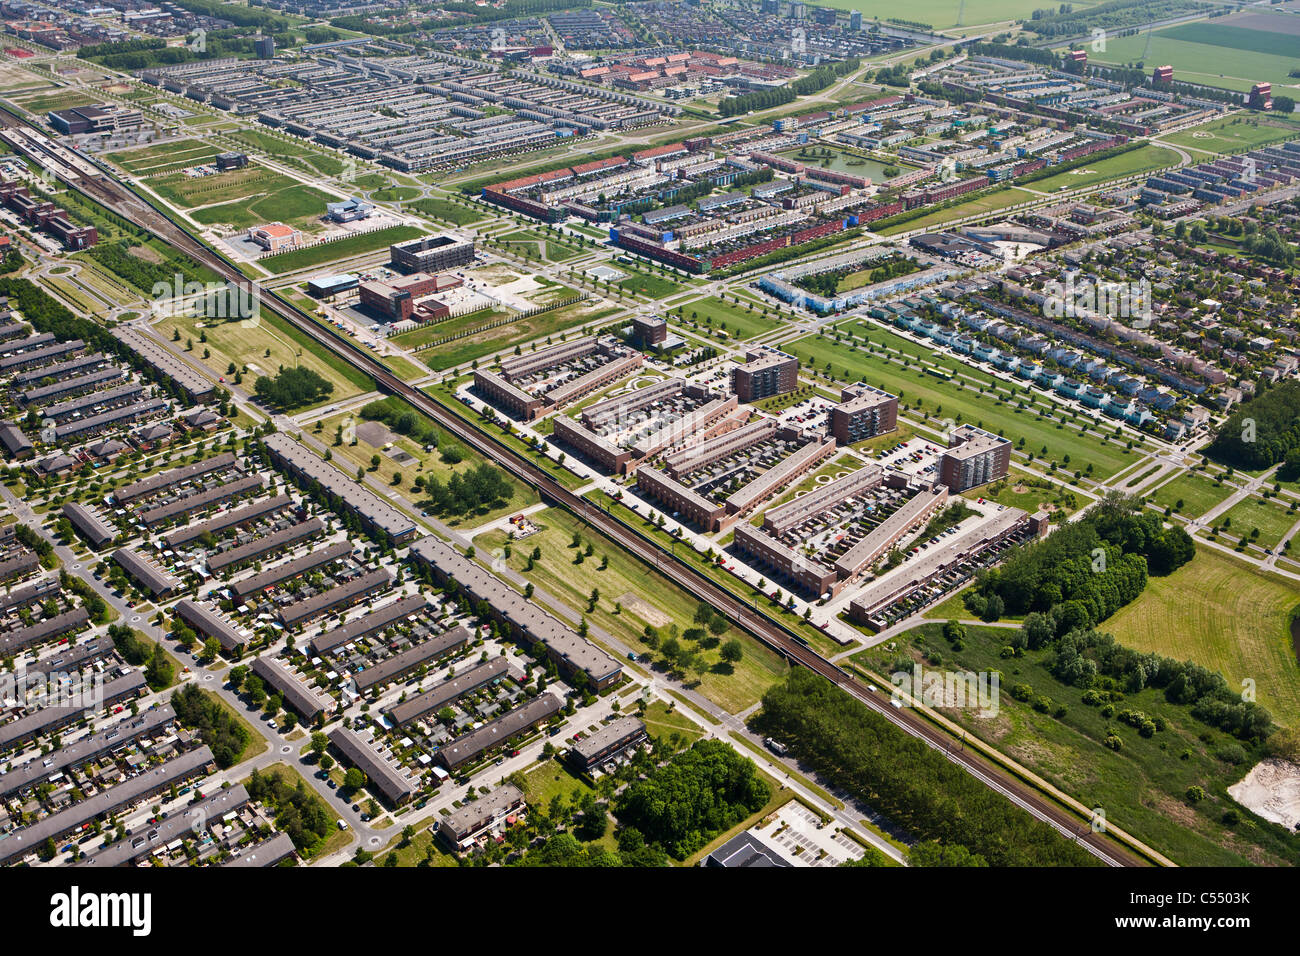 The Netherlands, Almere, Modern residential areas. Aerial Stock Photo